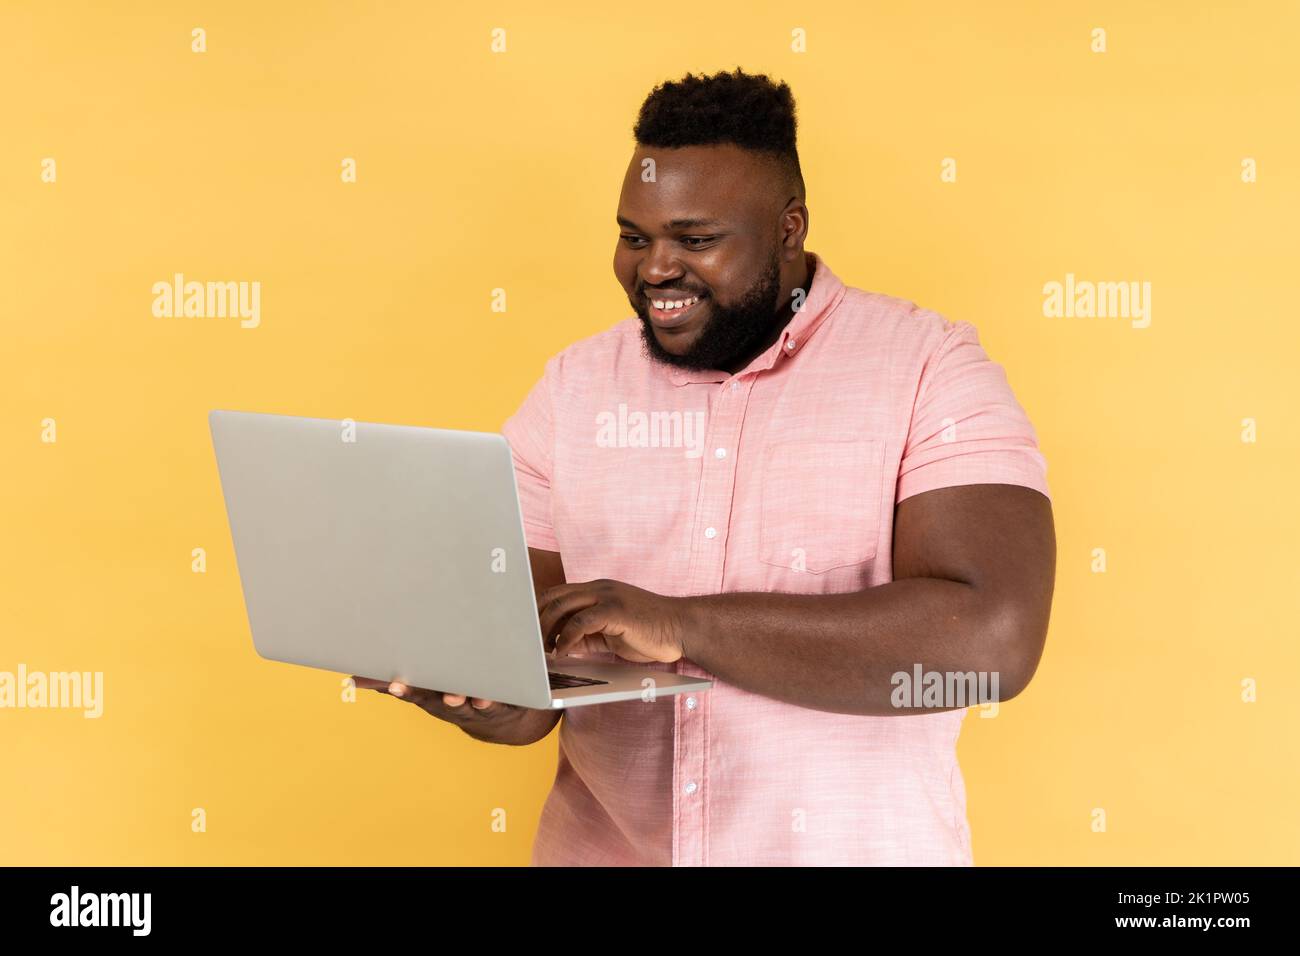 Portrait of positive freelancer man wearing pink shirt standing and holding laptop, satisfied with teleworking, likes his job, looking at display. Indoor studio shot isolated on yellow background. Stock Photo